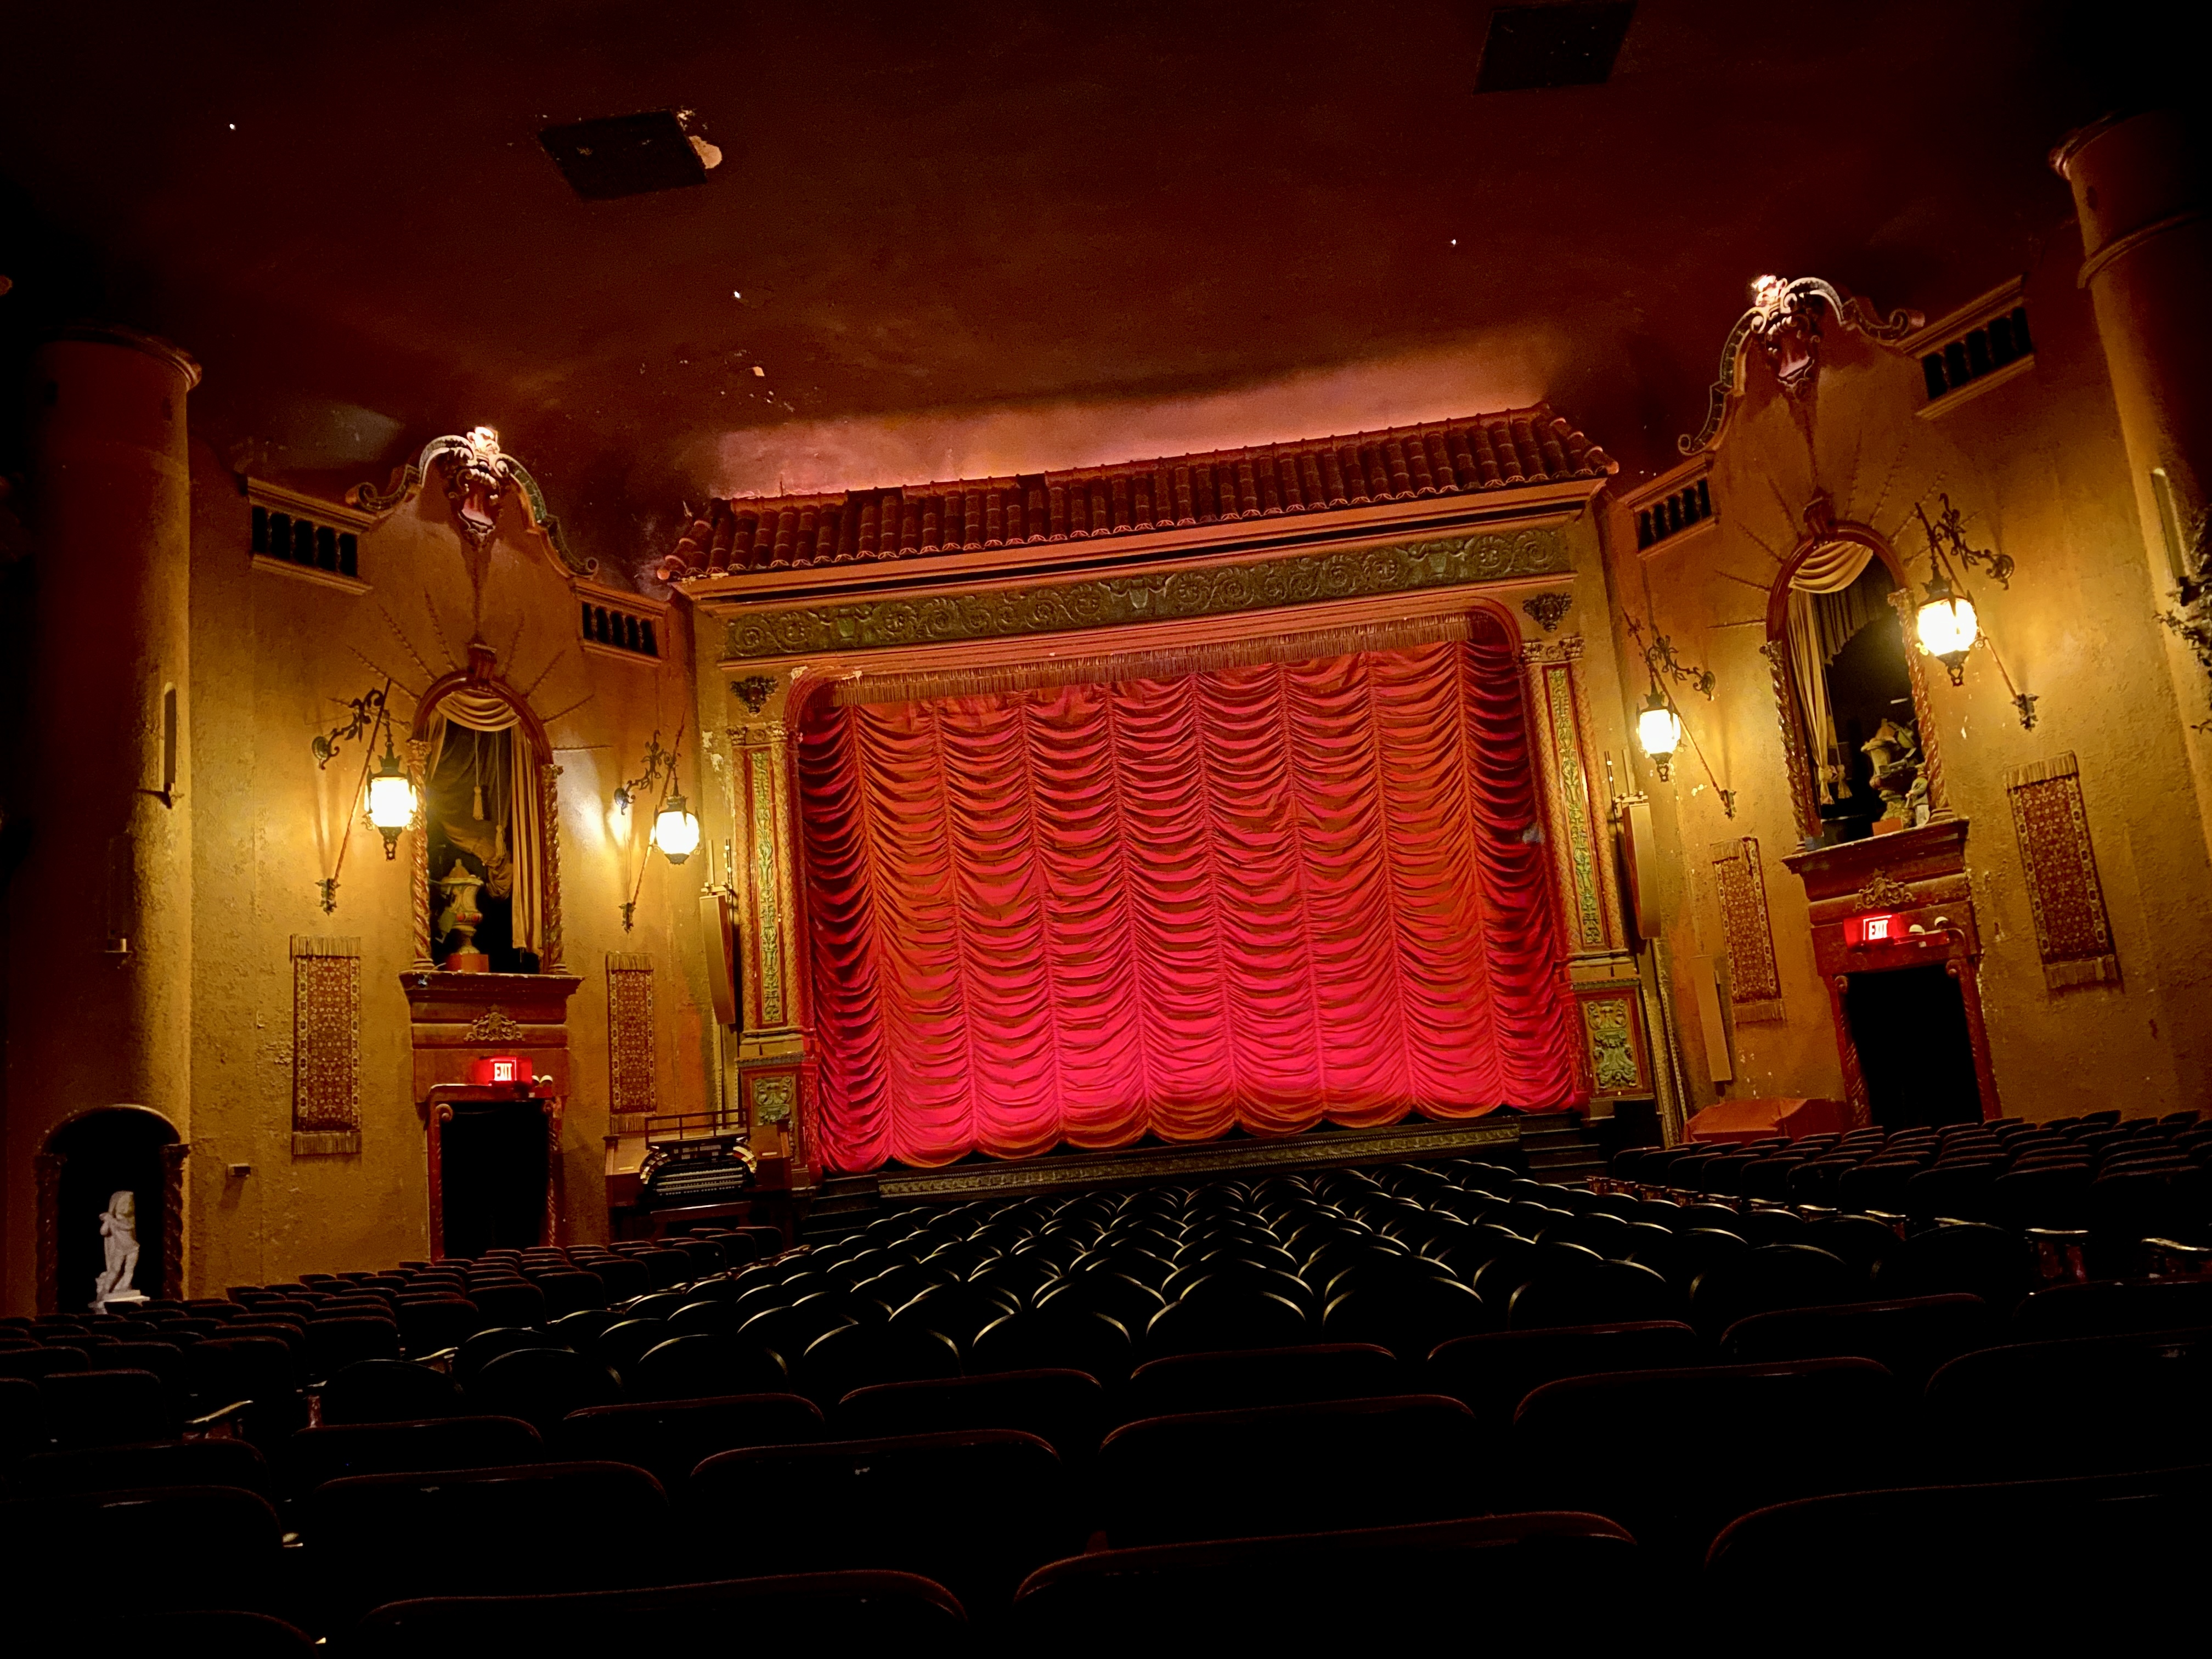 A canted view of an empty vintage movie theater styled like a Italian piazza with a red curtain hanging in front of the screen